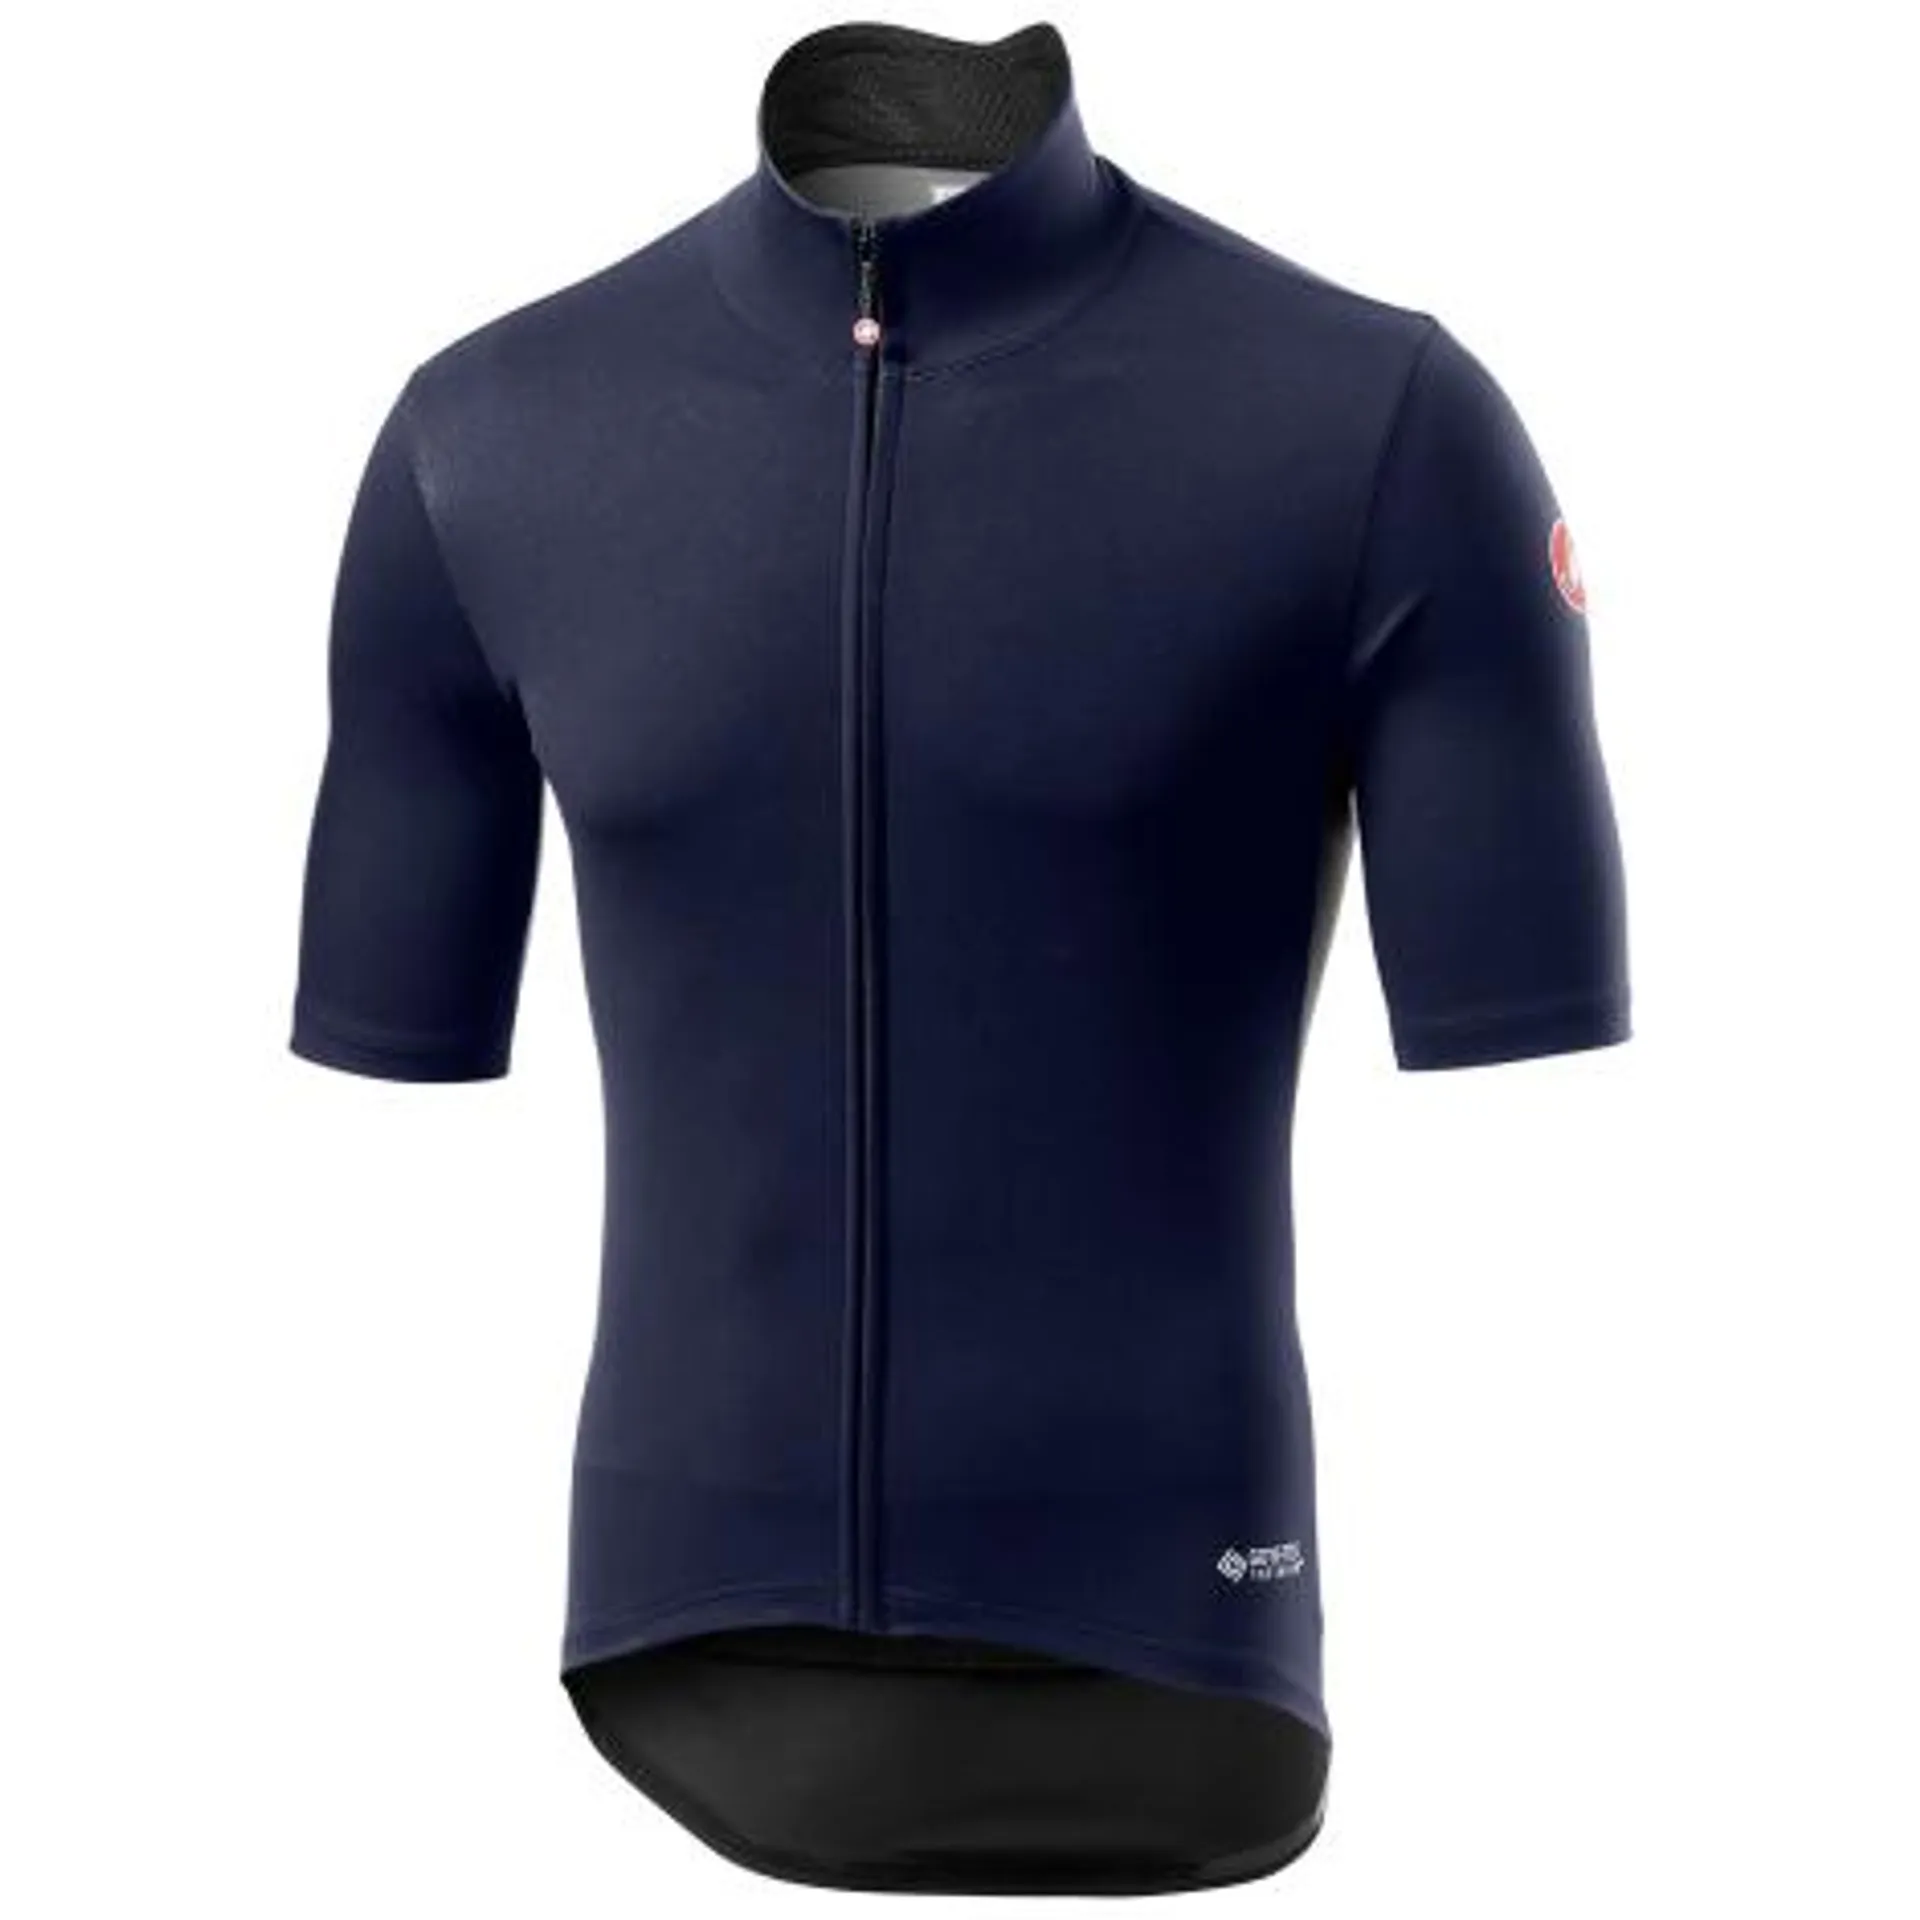 Castelli Perfetto ROS Light Short Sleeve Cycling Jersey - SS21